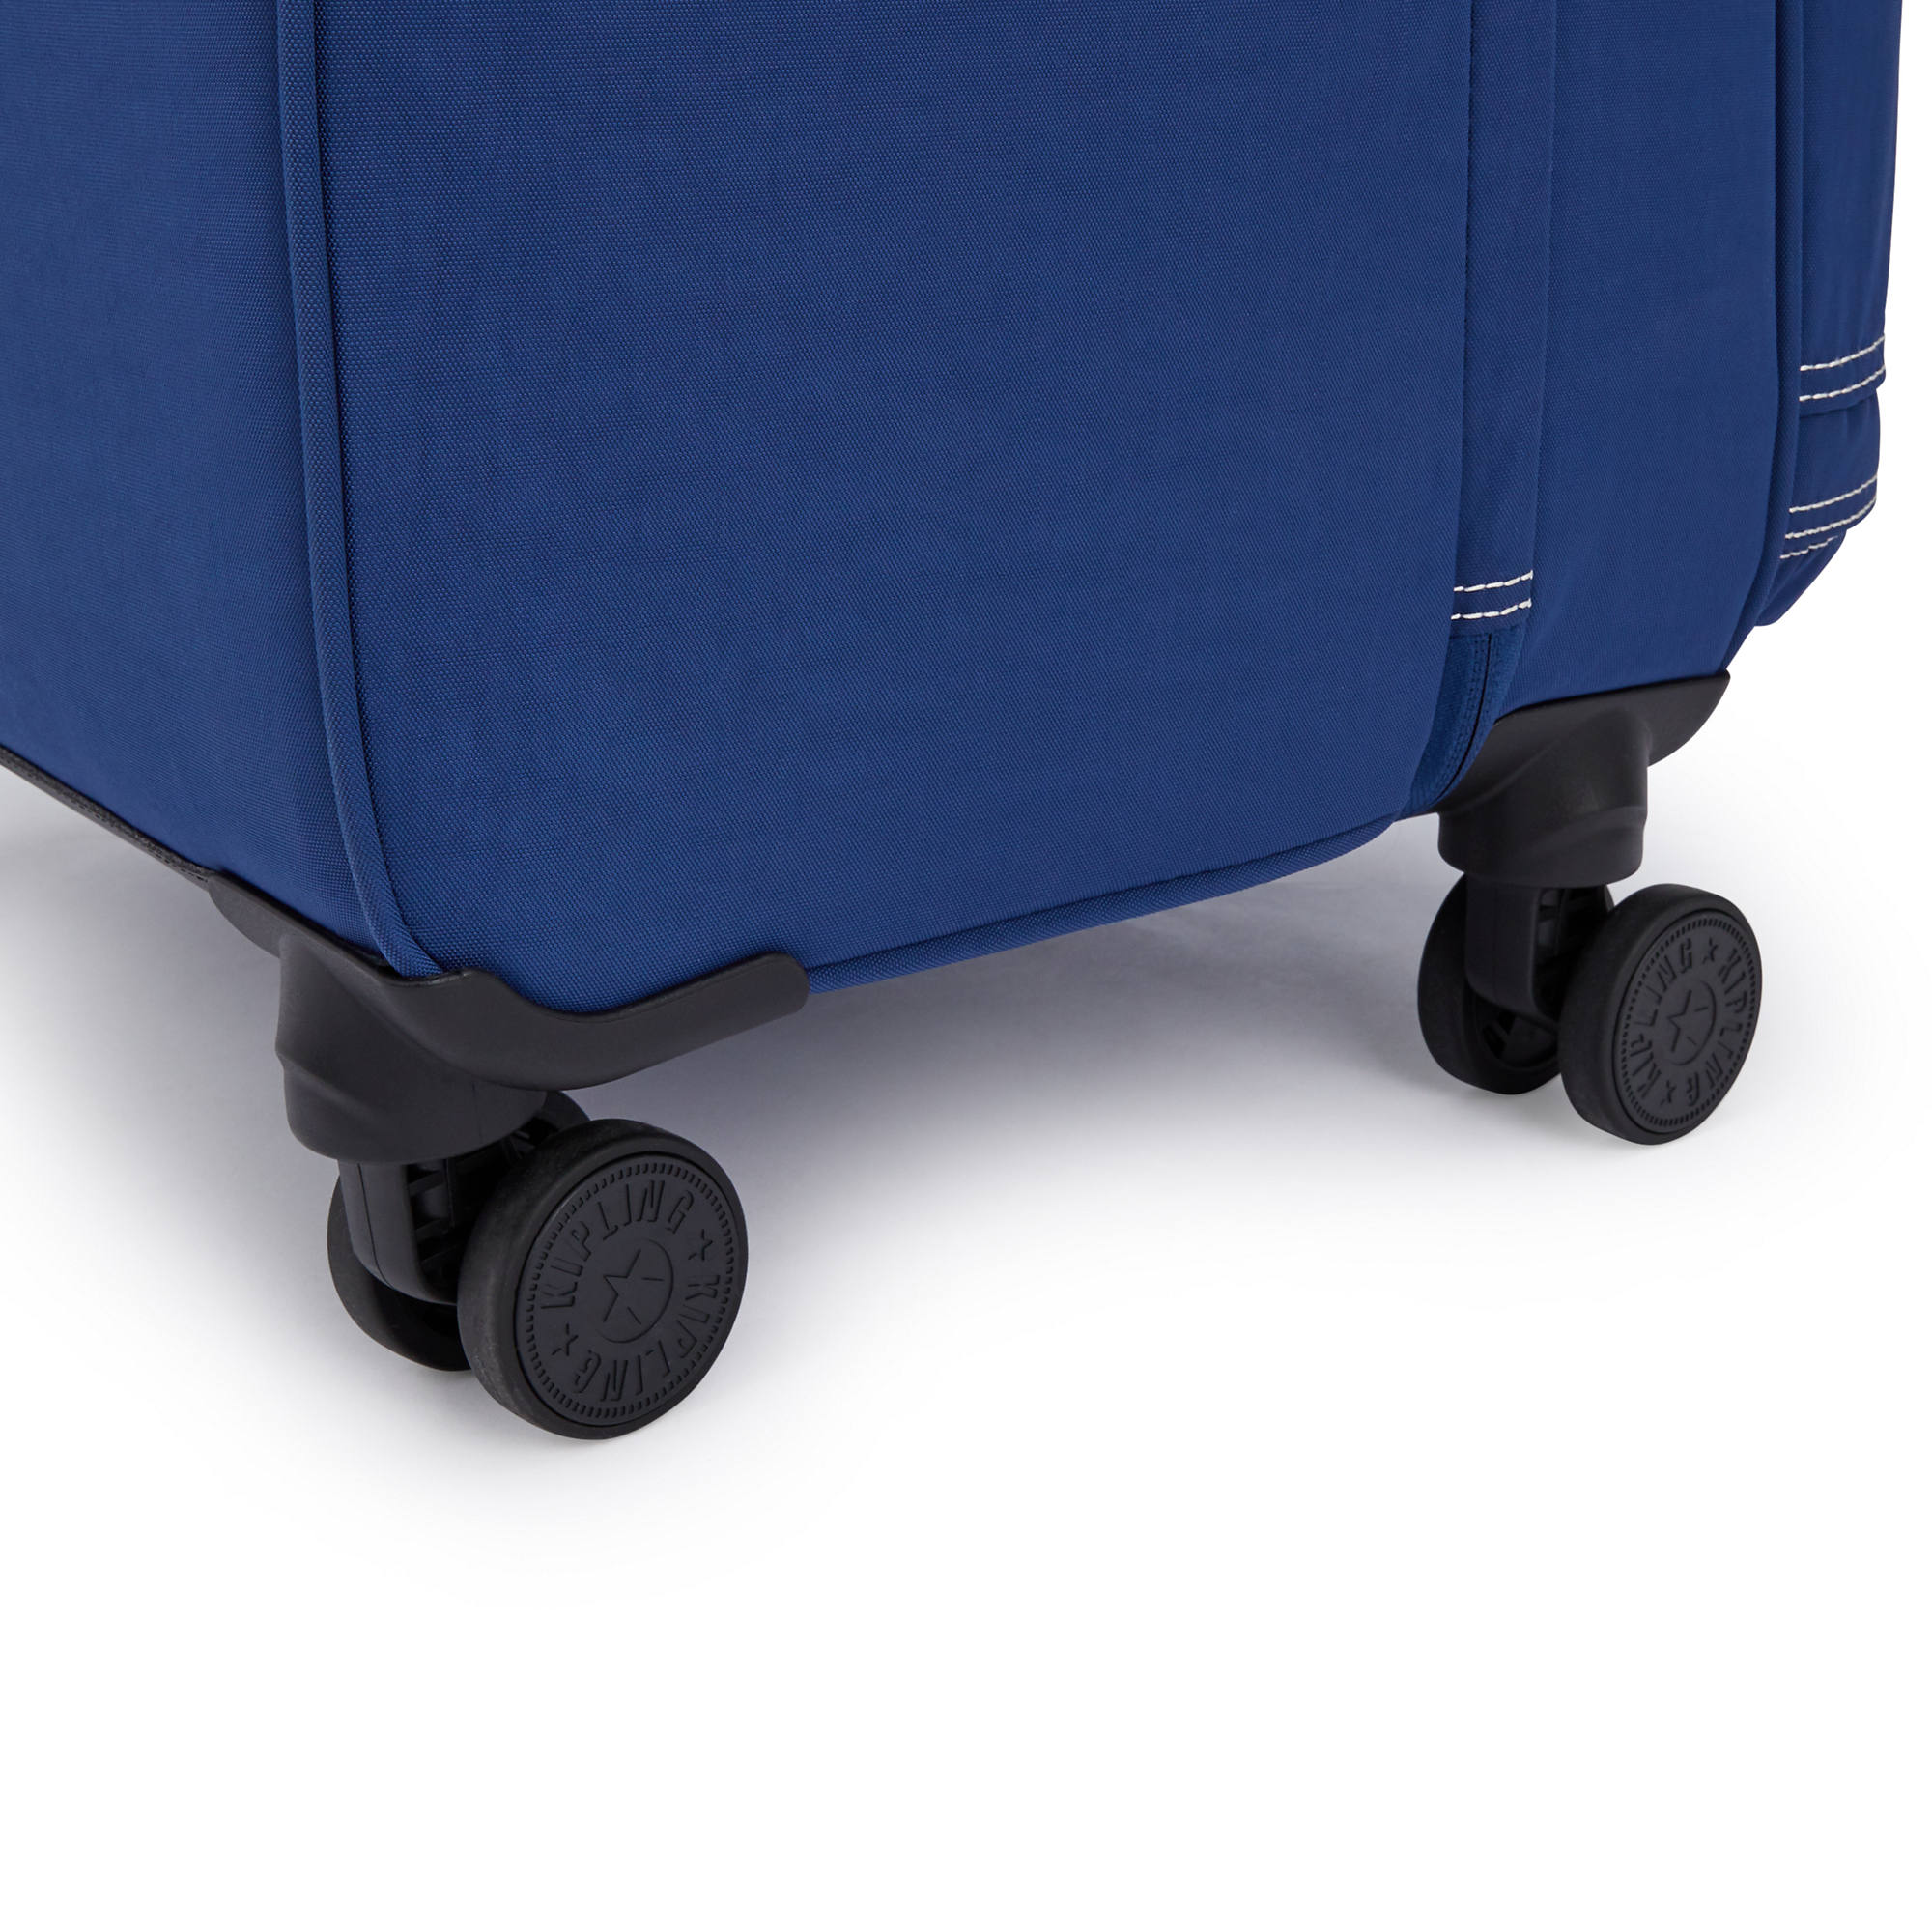 Spontaneous Large Rolling Luggage